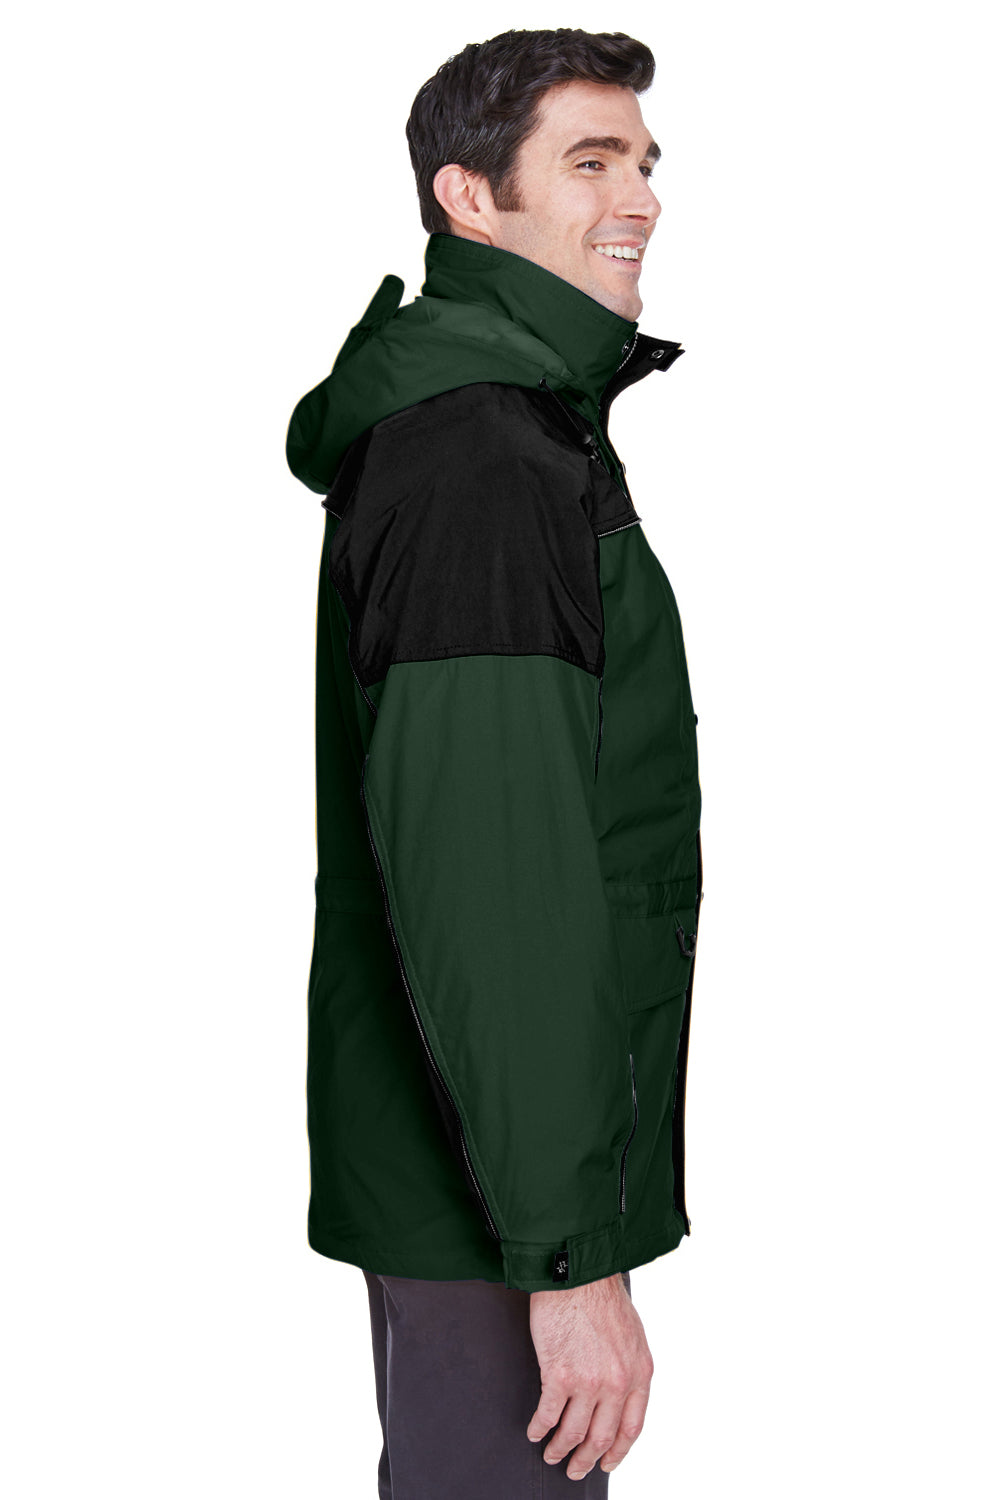 North End 88006 Mens 3-in-1 Full Zip Hooded Jacket Forest Green/Black Side